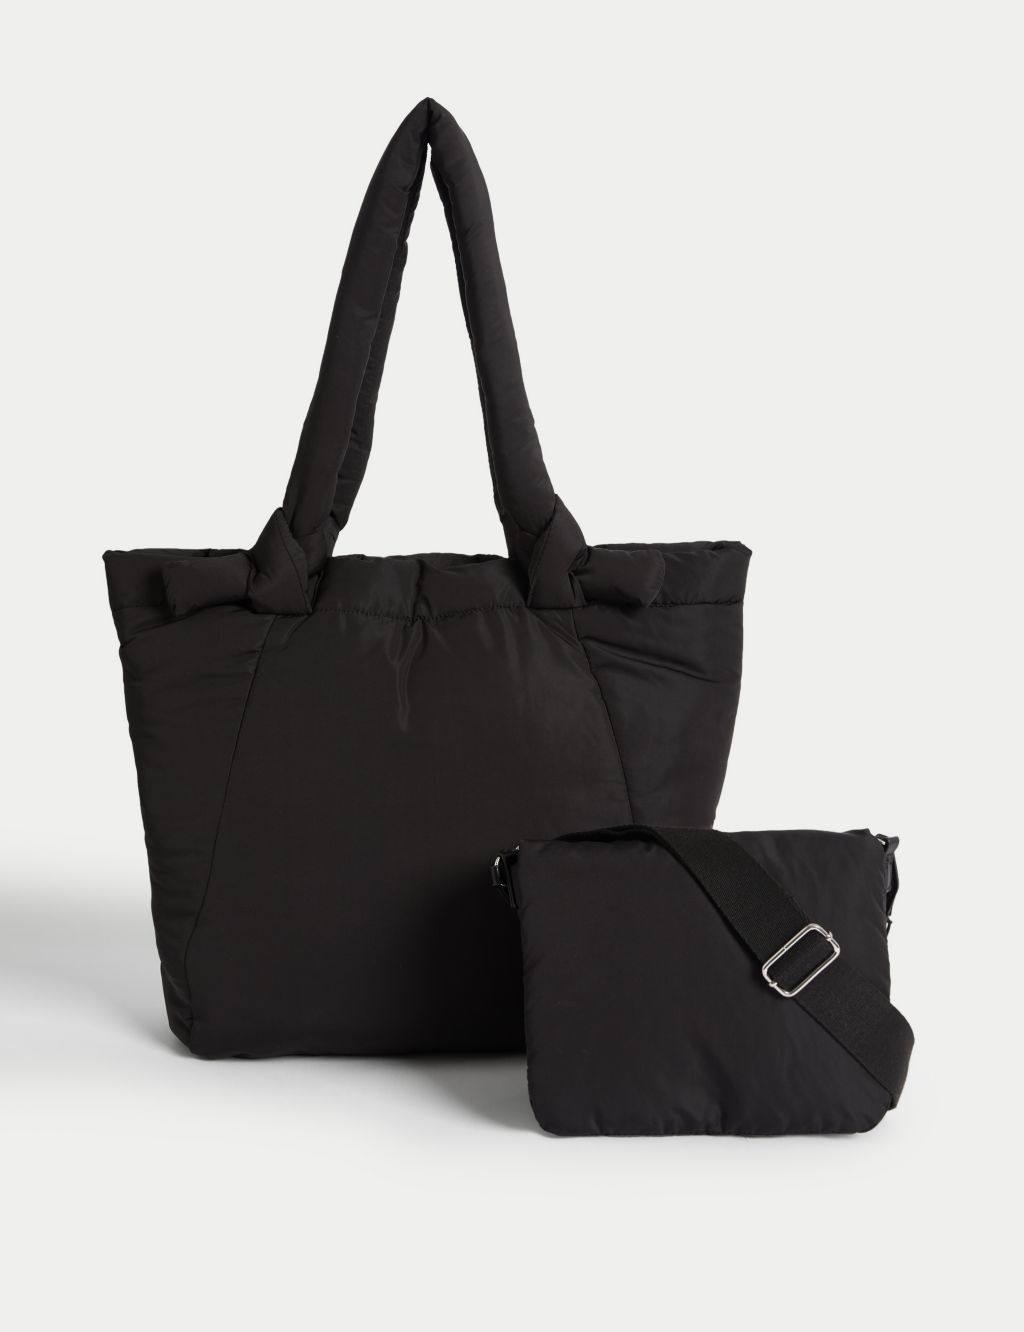 Water Resistant Padded Tote Shopper image 5